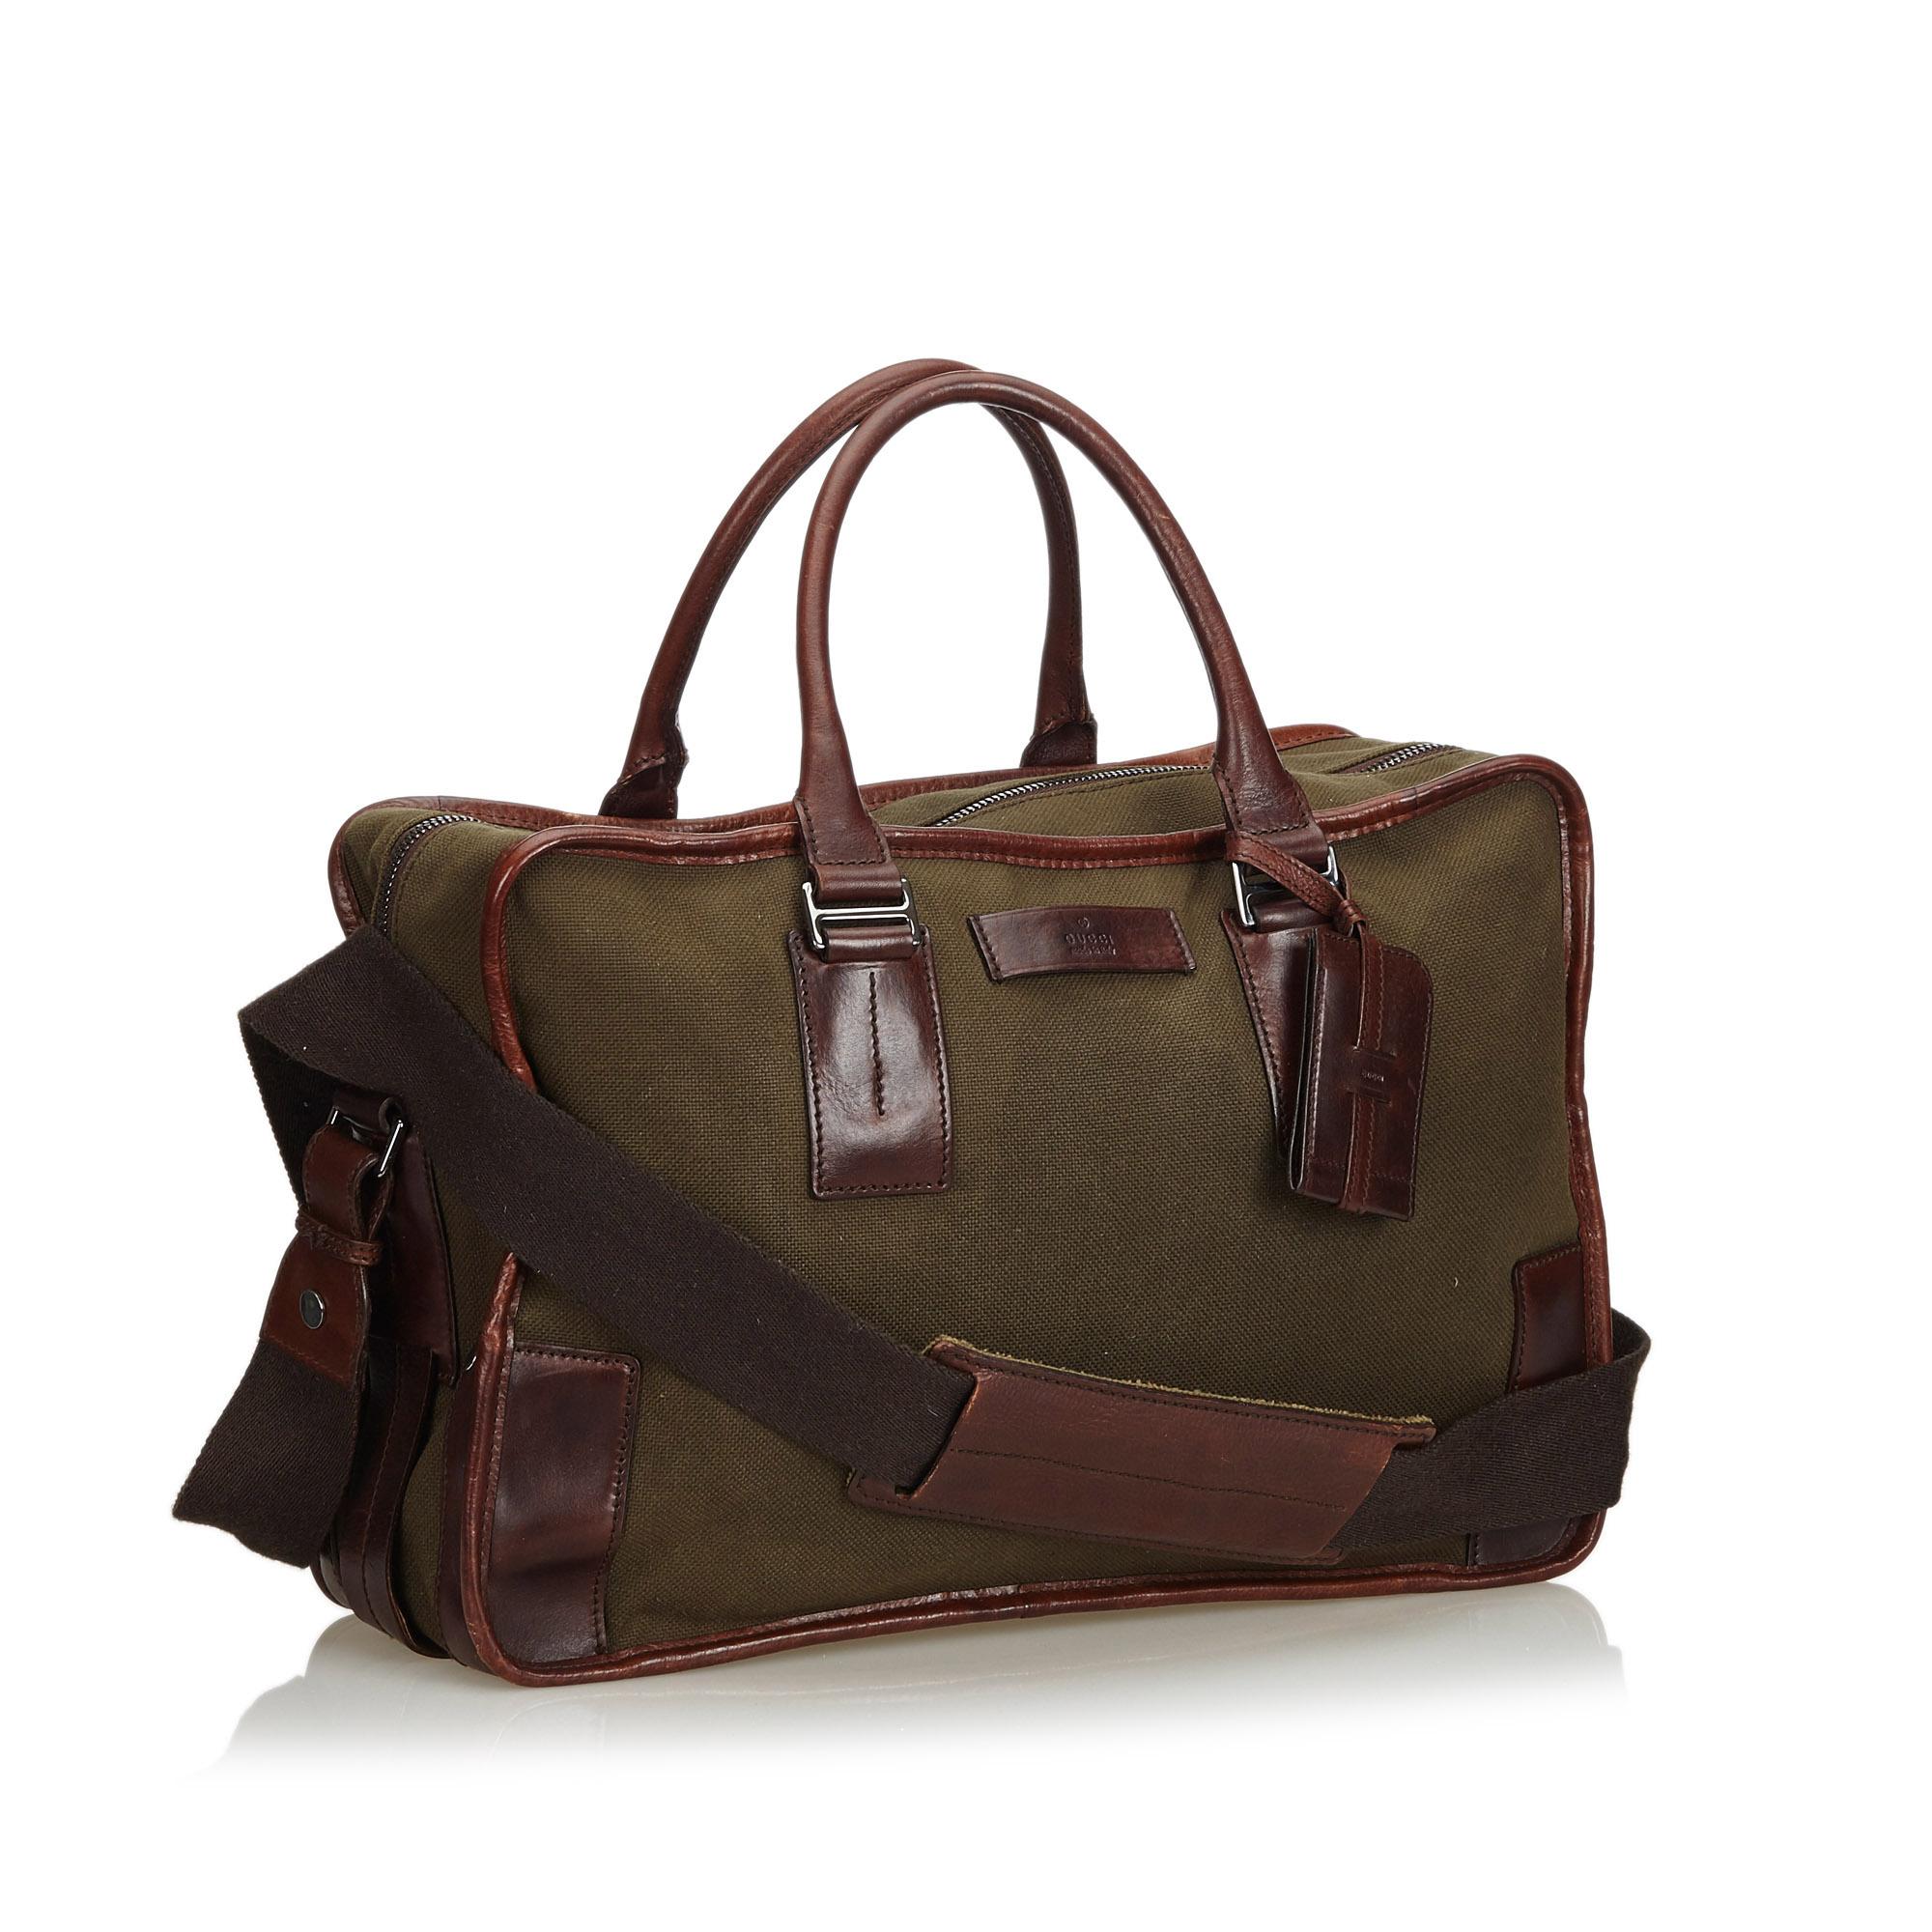 This business bag features a canvas body with leather trim, rolled leather handles, a flat strap, a top zip closure, and an interior zip pocket. It carries as B condition rating.

Inclusions: 
This item does not come with